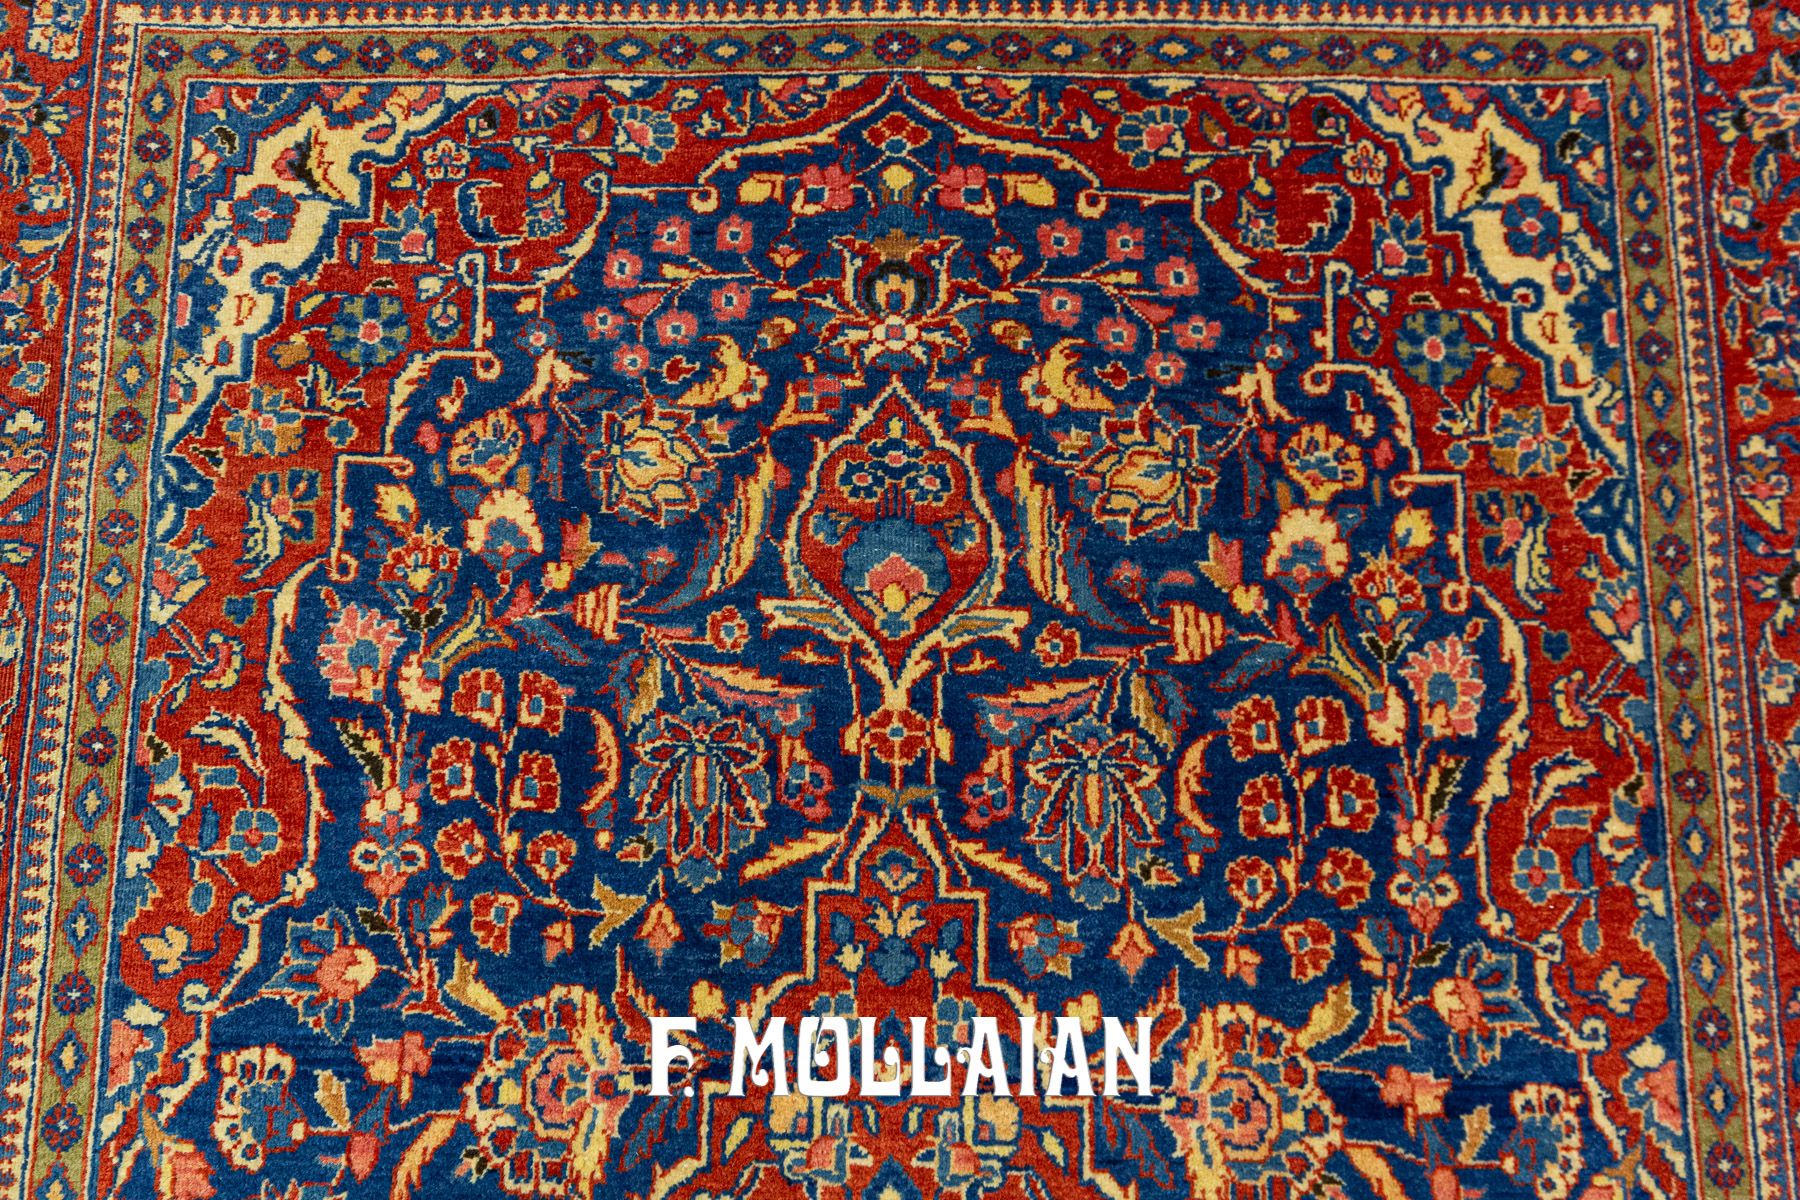 Antique Persian Kashan Kurk Rug With Classical Medallion Design N°:81159096  – Mollaian Farzin Carpets Intended For Classical Rugs (View 13 of 15)